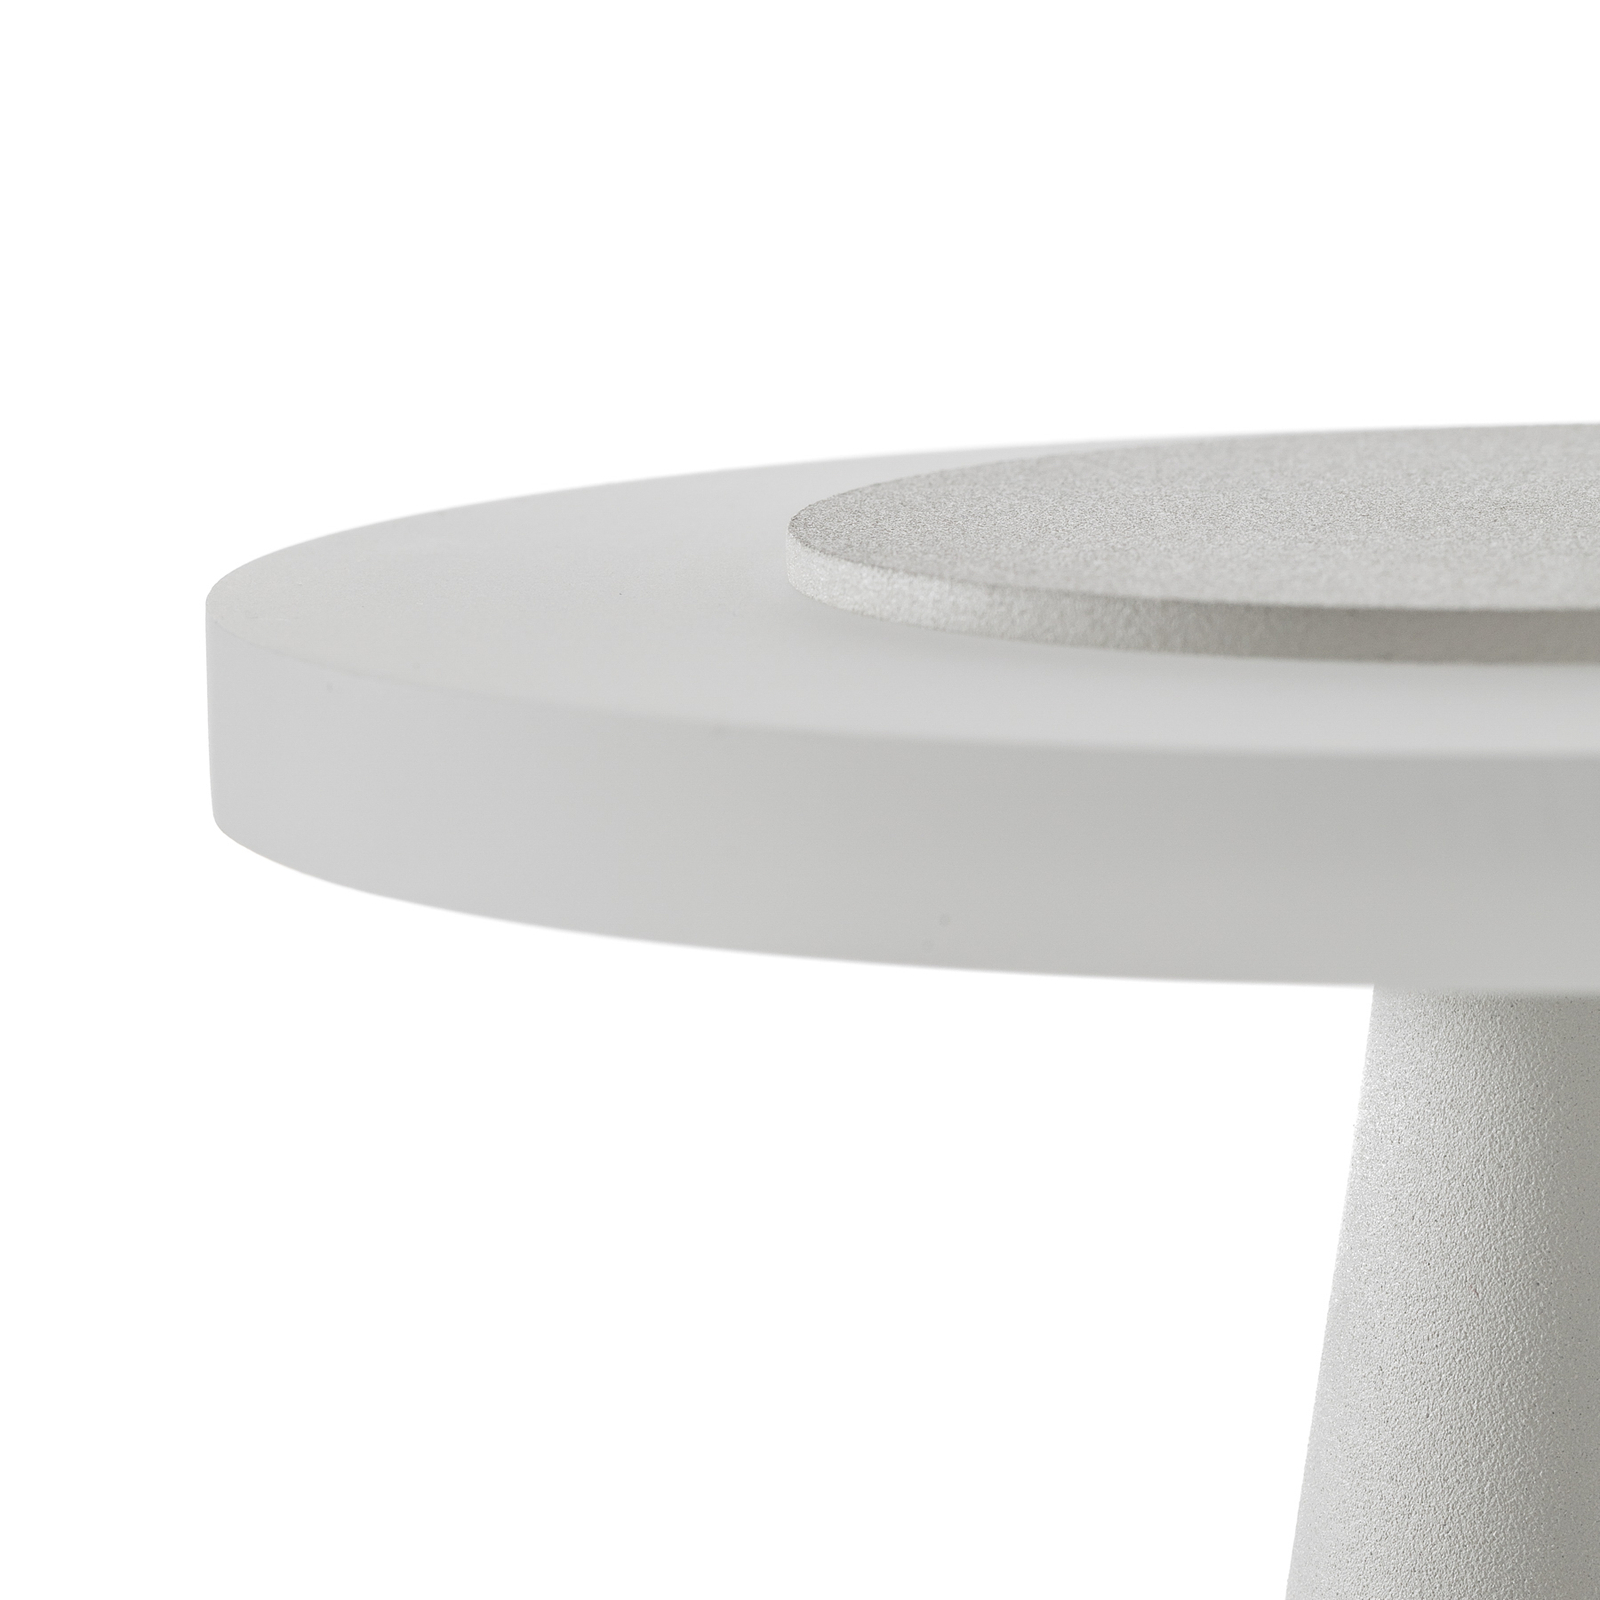 Helestra Bax lampe table variateur tactile blanche